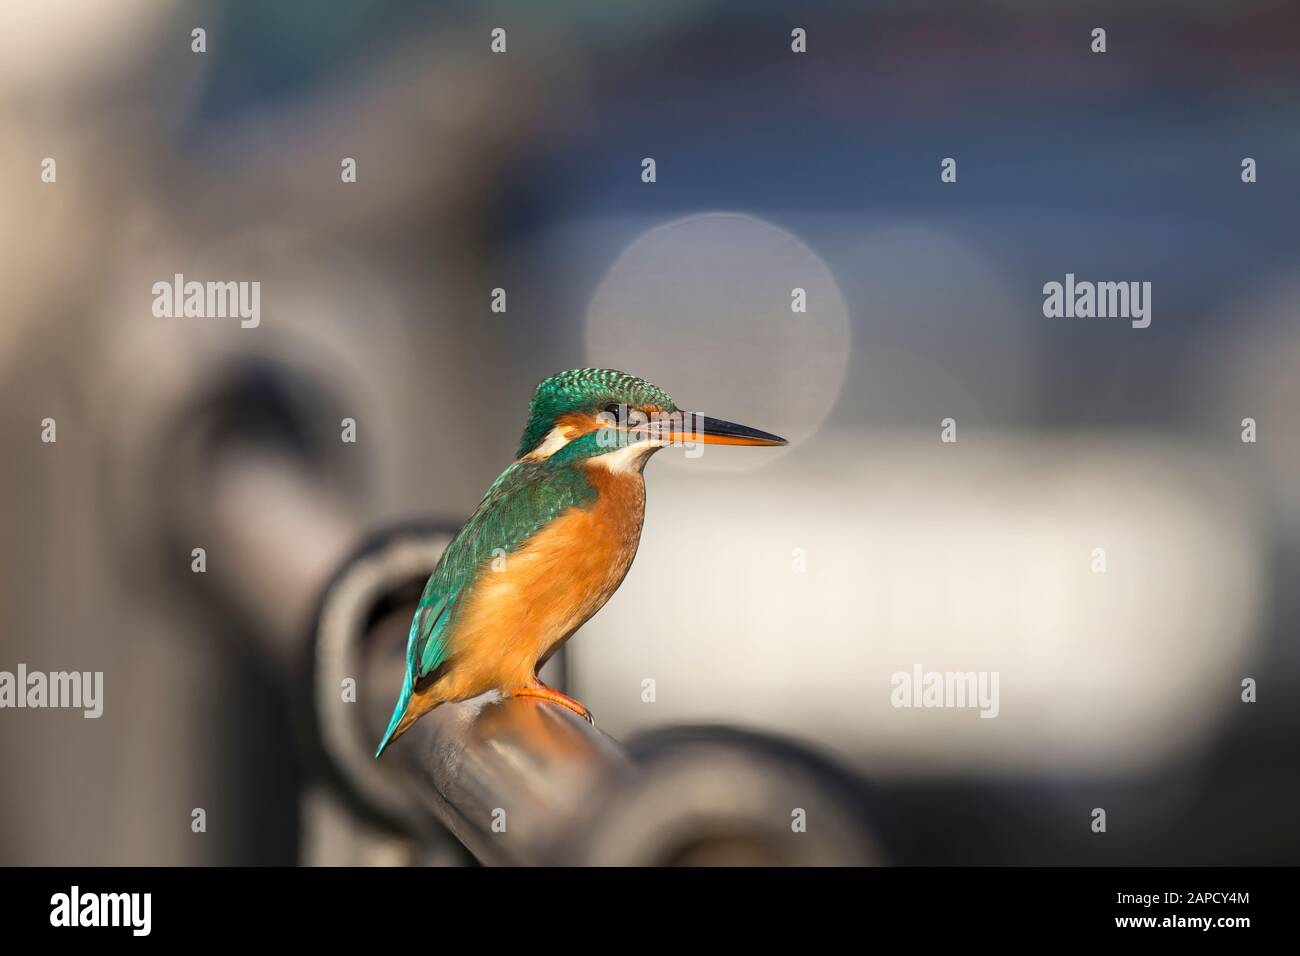 Evening side view close up of wild UK kingfisher bird (Alcedo atthis) isolated outdoors, perching on railings in urban car park. UK wildlife. Stock Photo